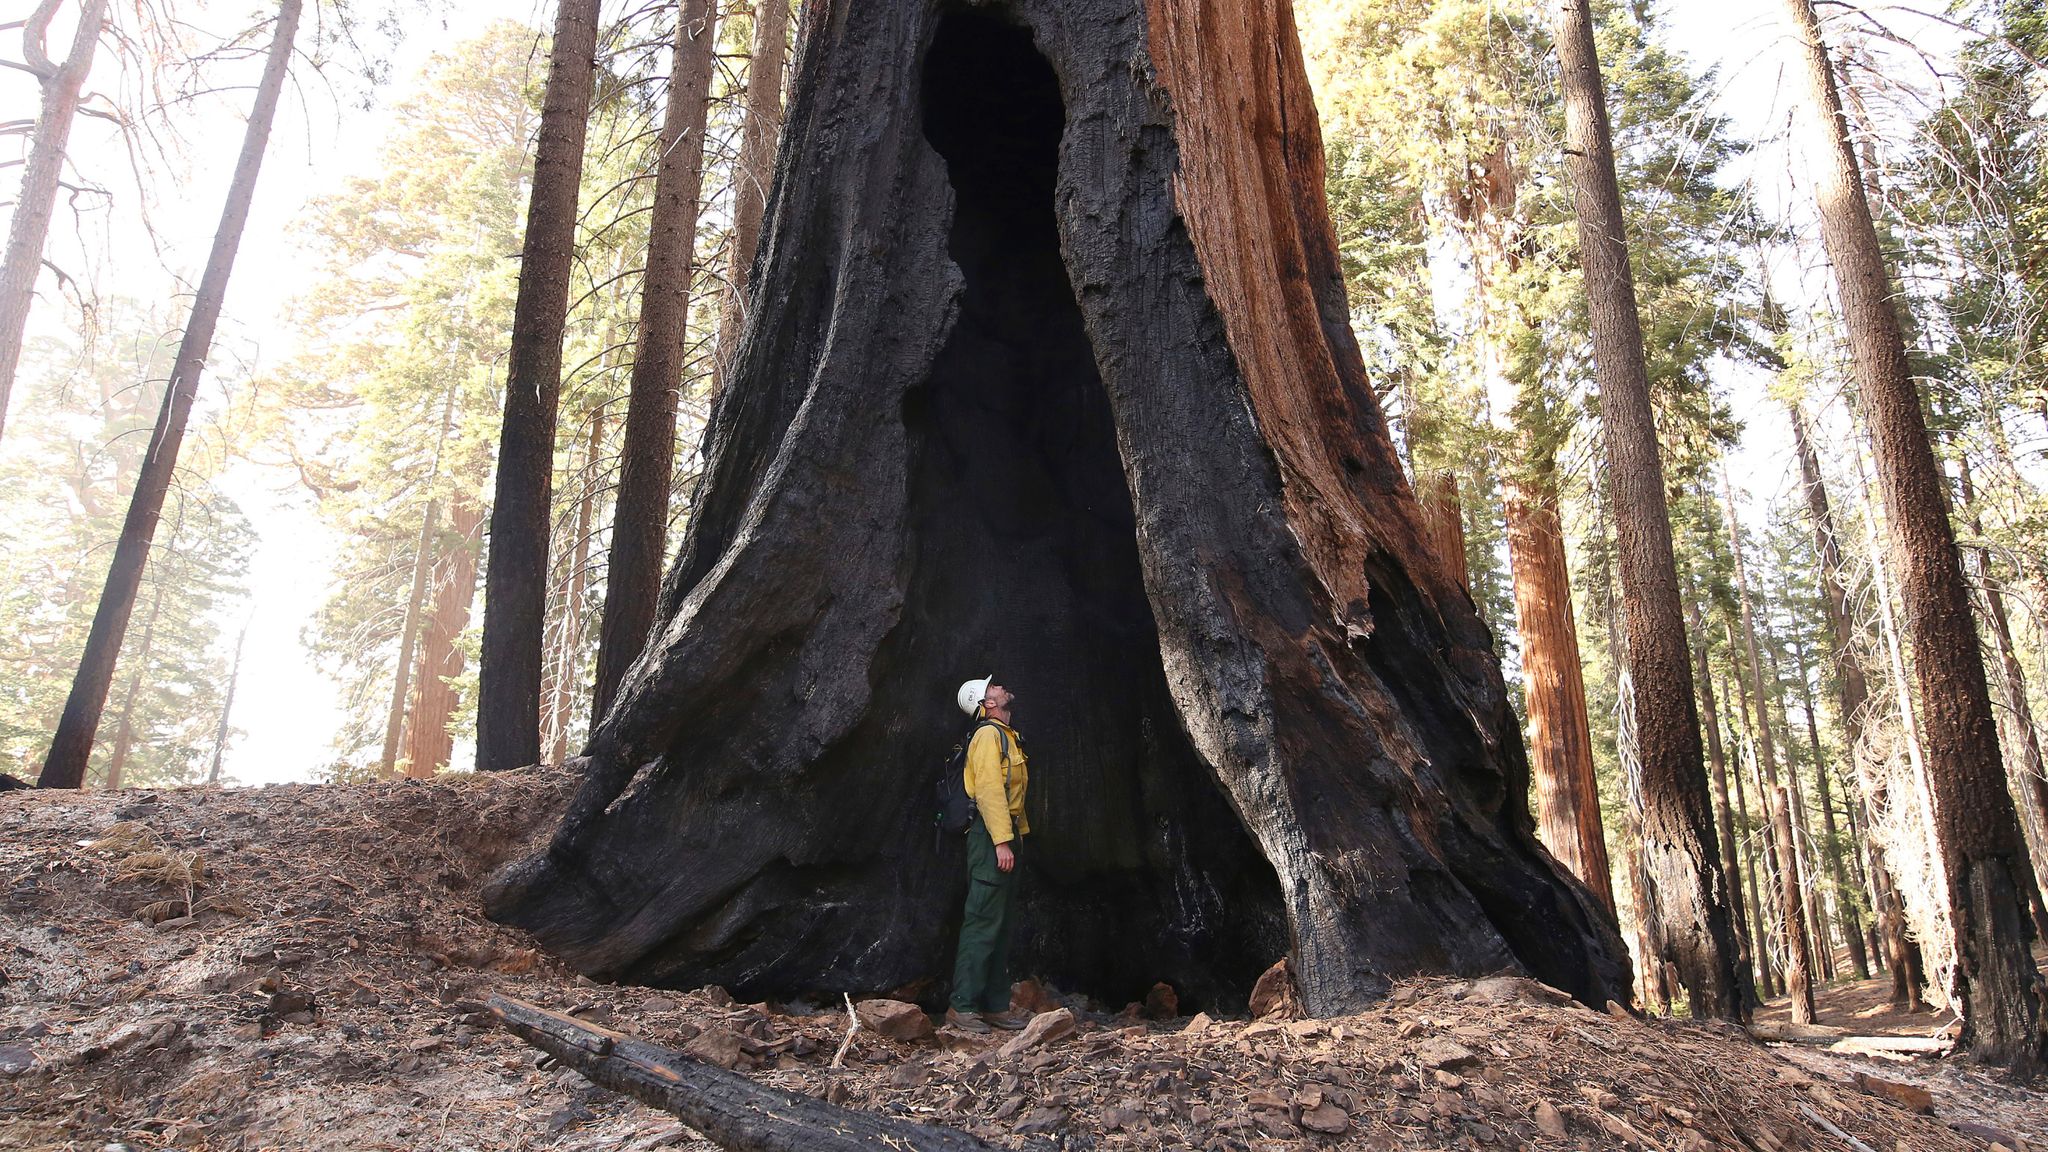 California Wildfires At Least 10000 Giant Sequoia Trees Killed After Lightning Strikes Spark 